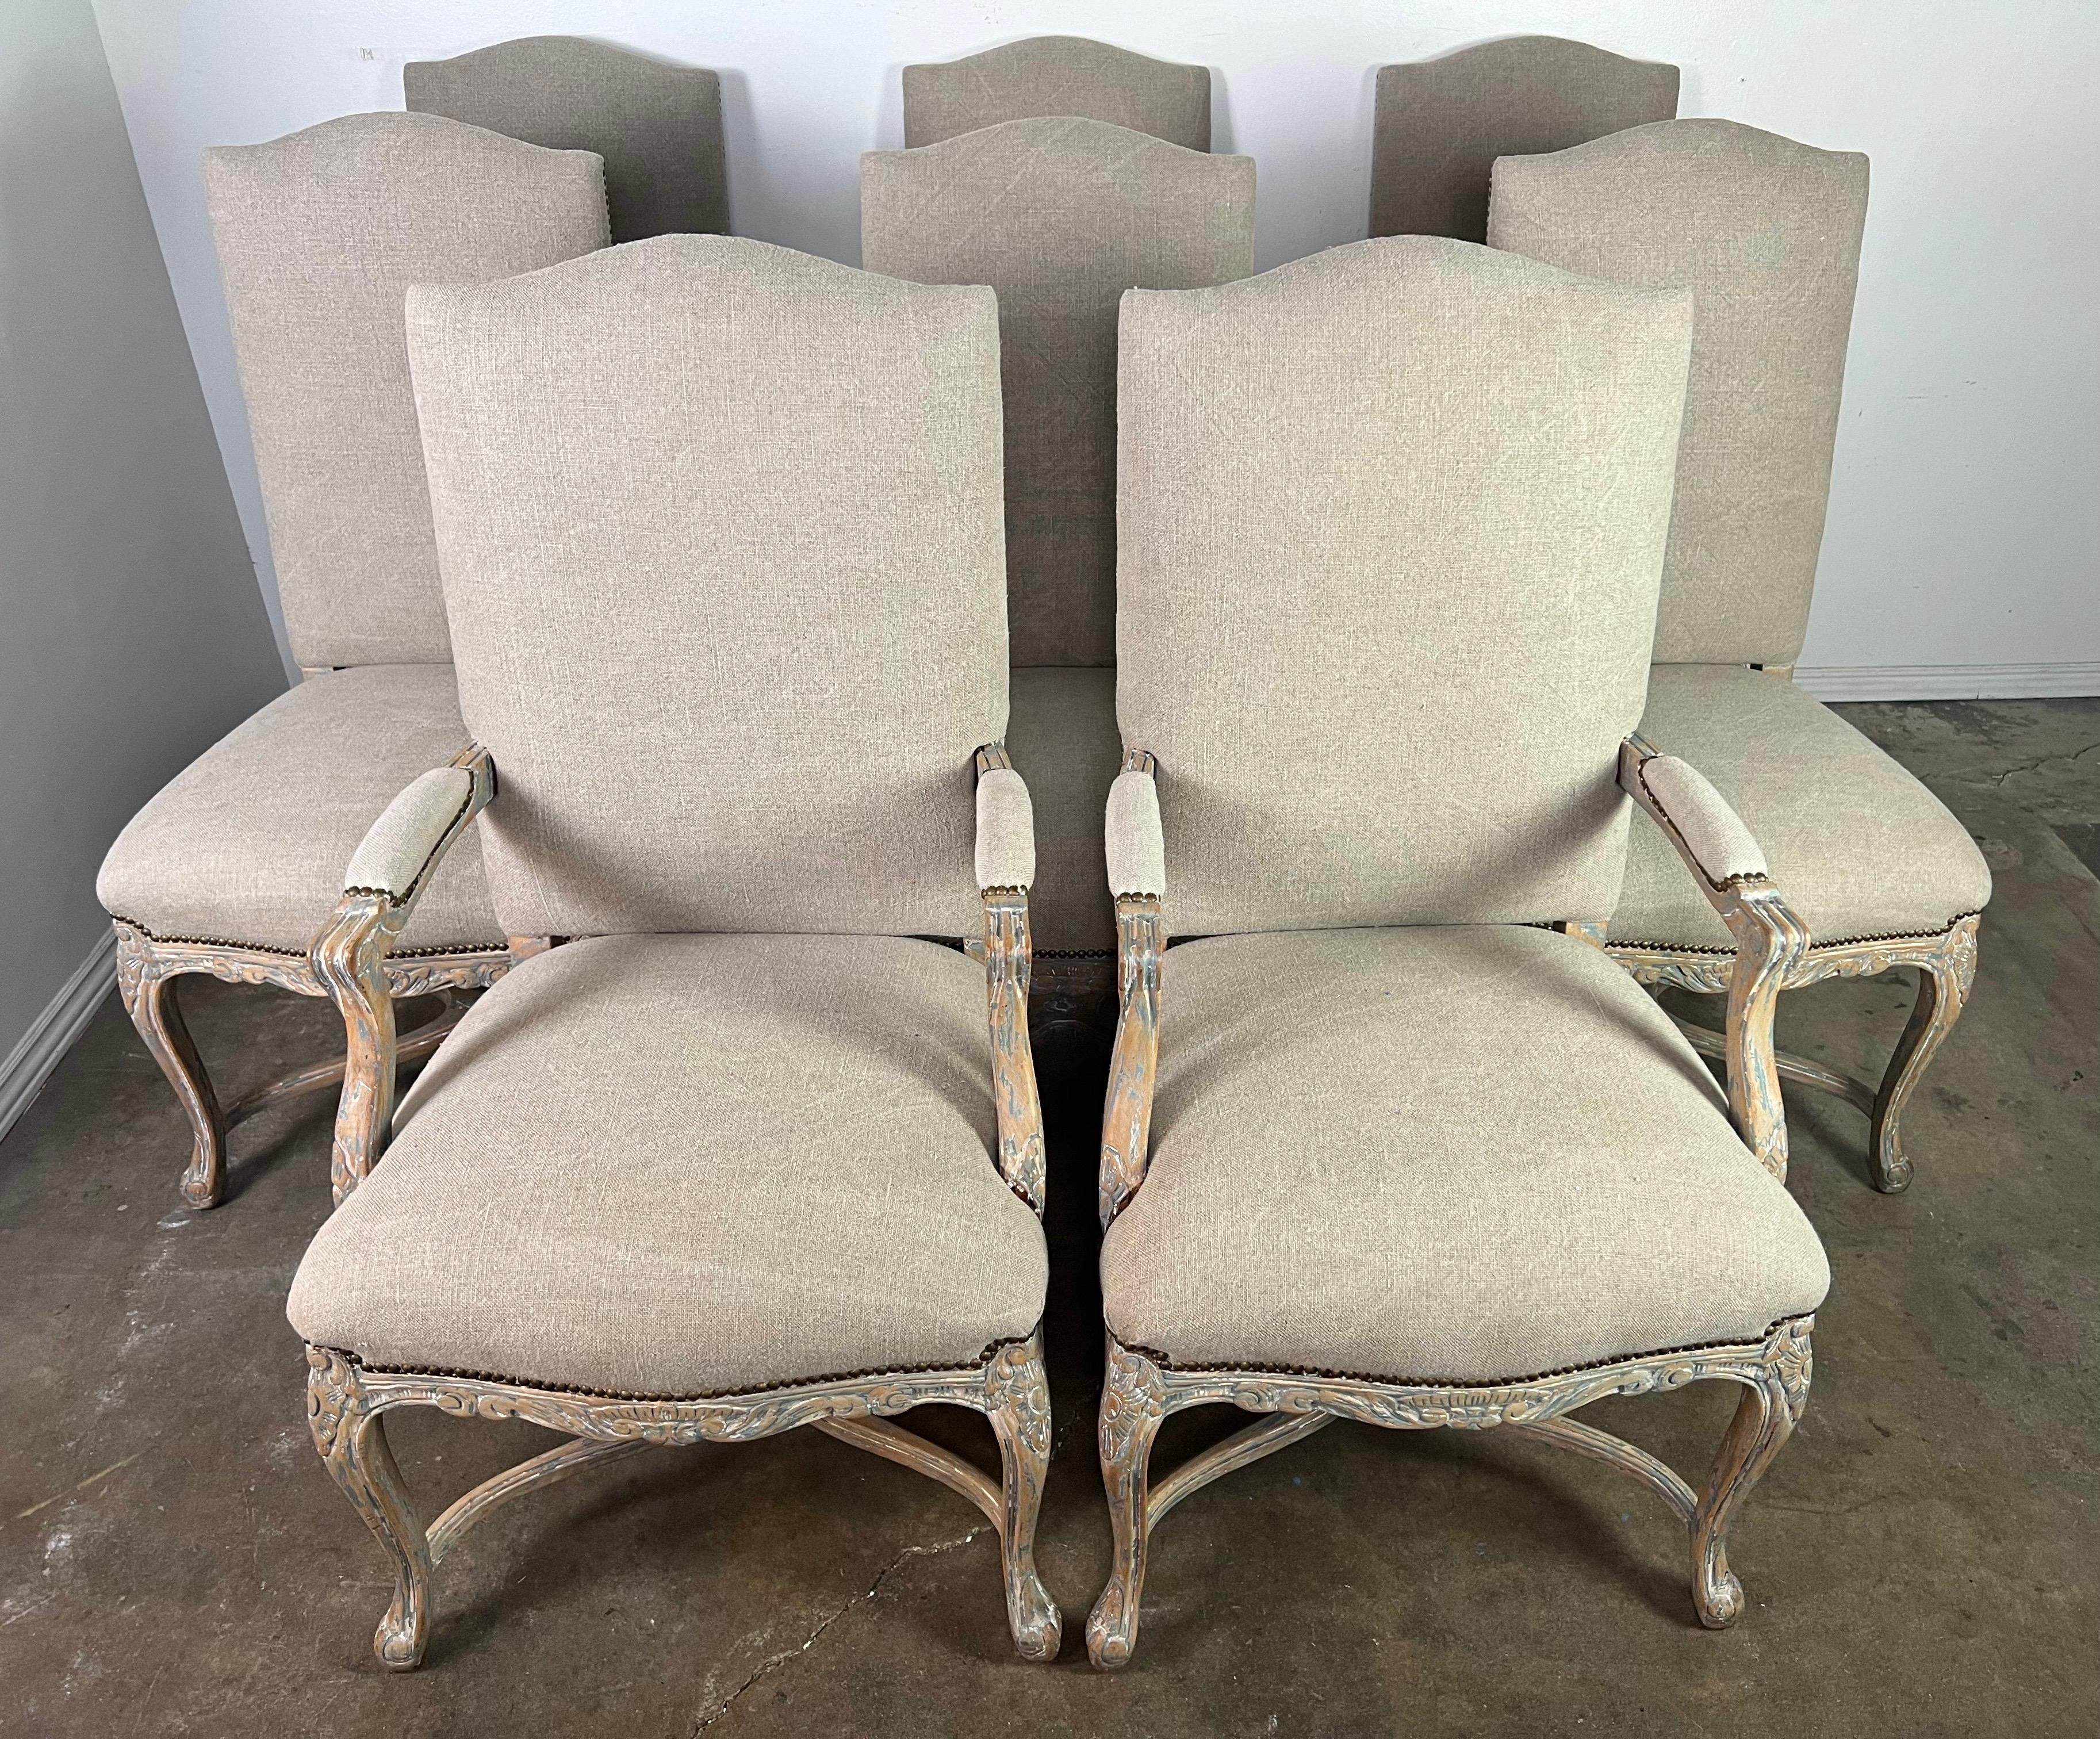 Set of eight Louis XV style French dining chairs, each exuding the elegance and graceful curves characteristic of the era.  These chairs are upholstered in Belgium linen, a material revered for its durability and classic beauty.  The natural texture